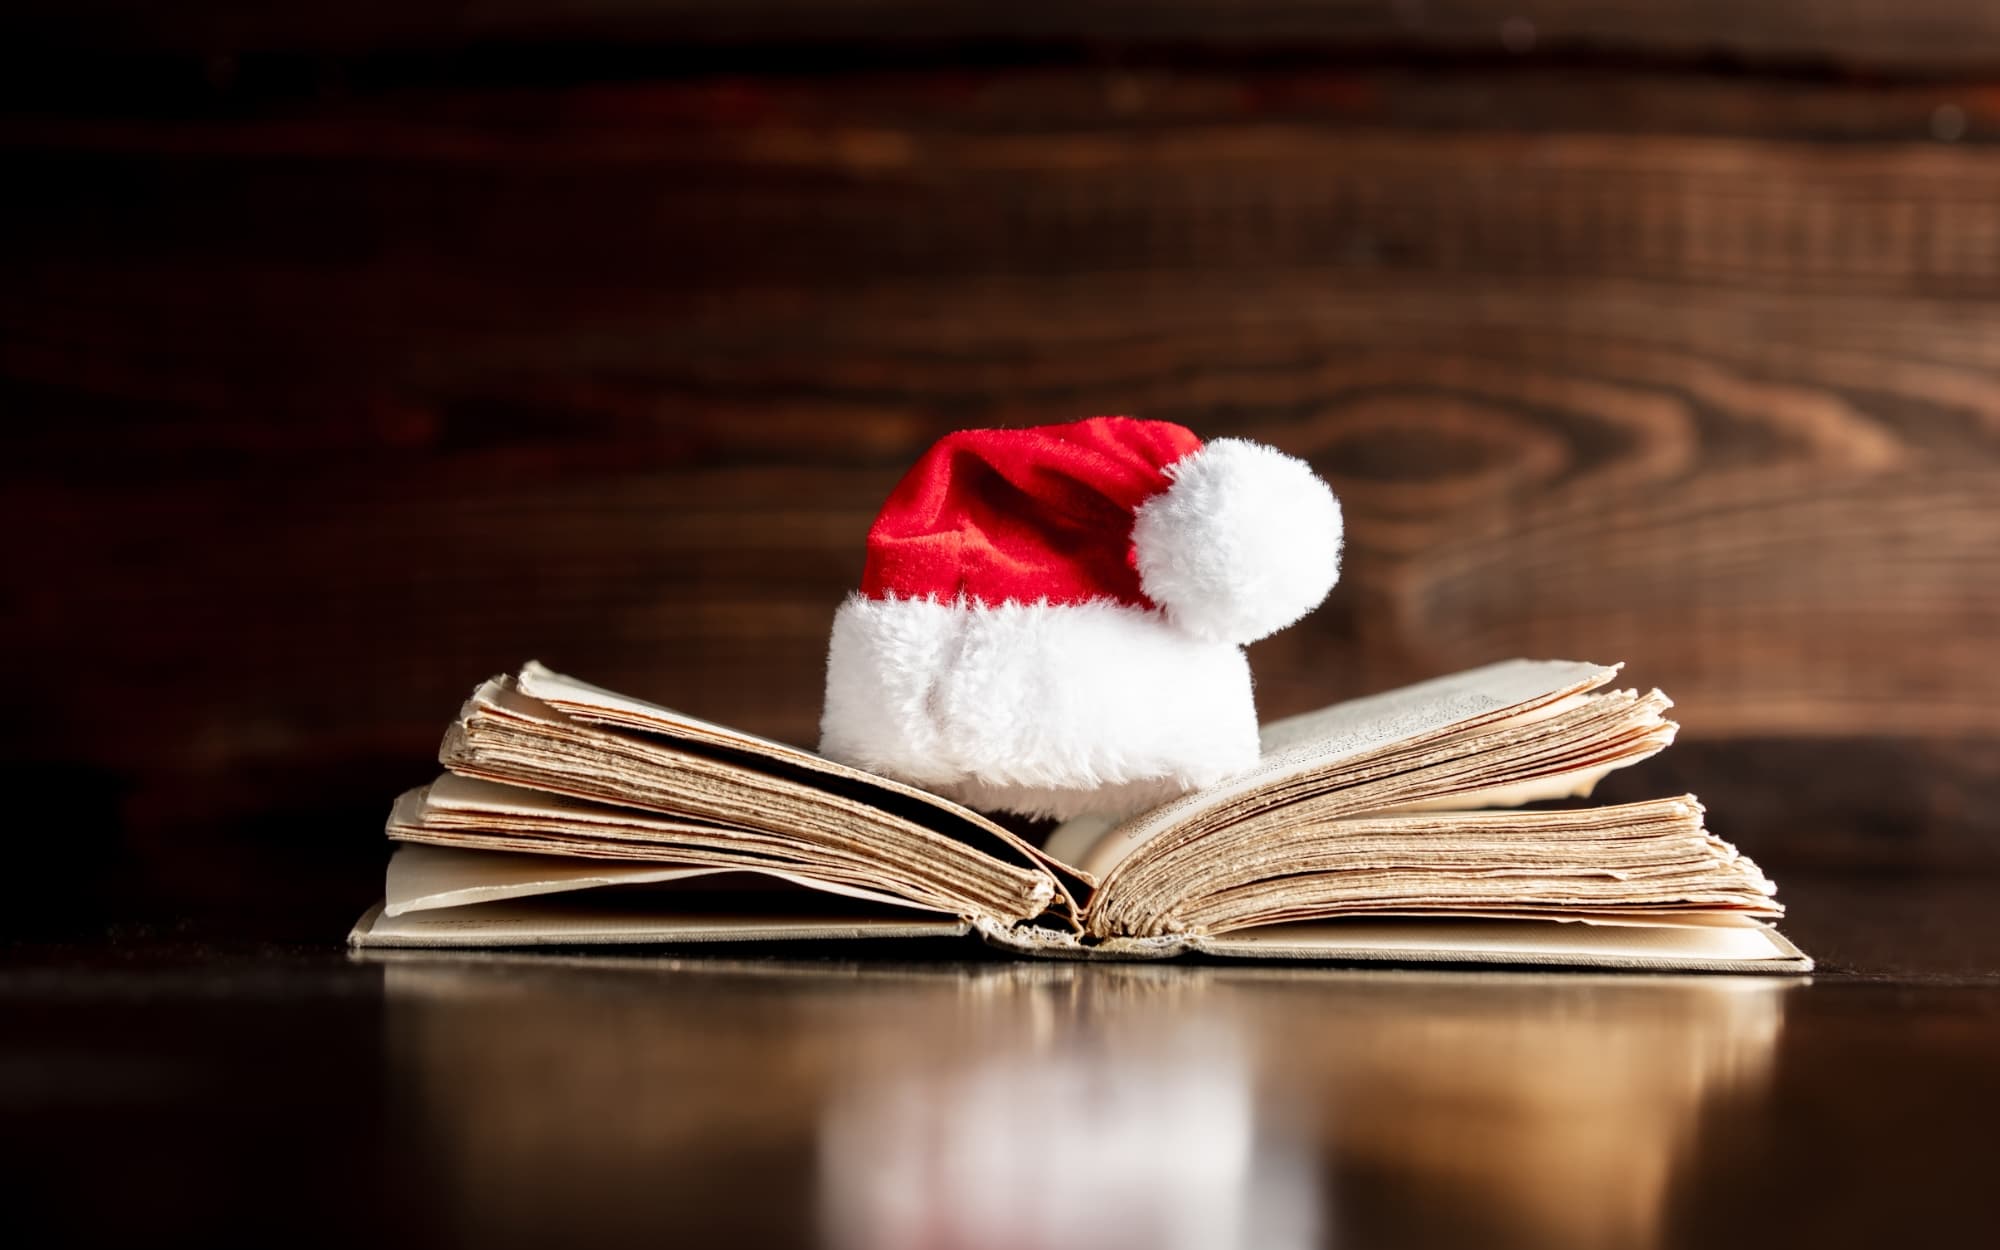 A book sits open on a table, containing a Christmas story. A Santa hat rests on top of it.